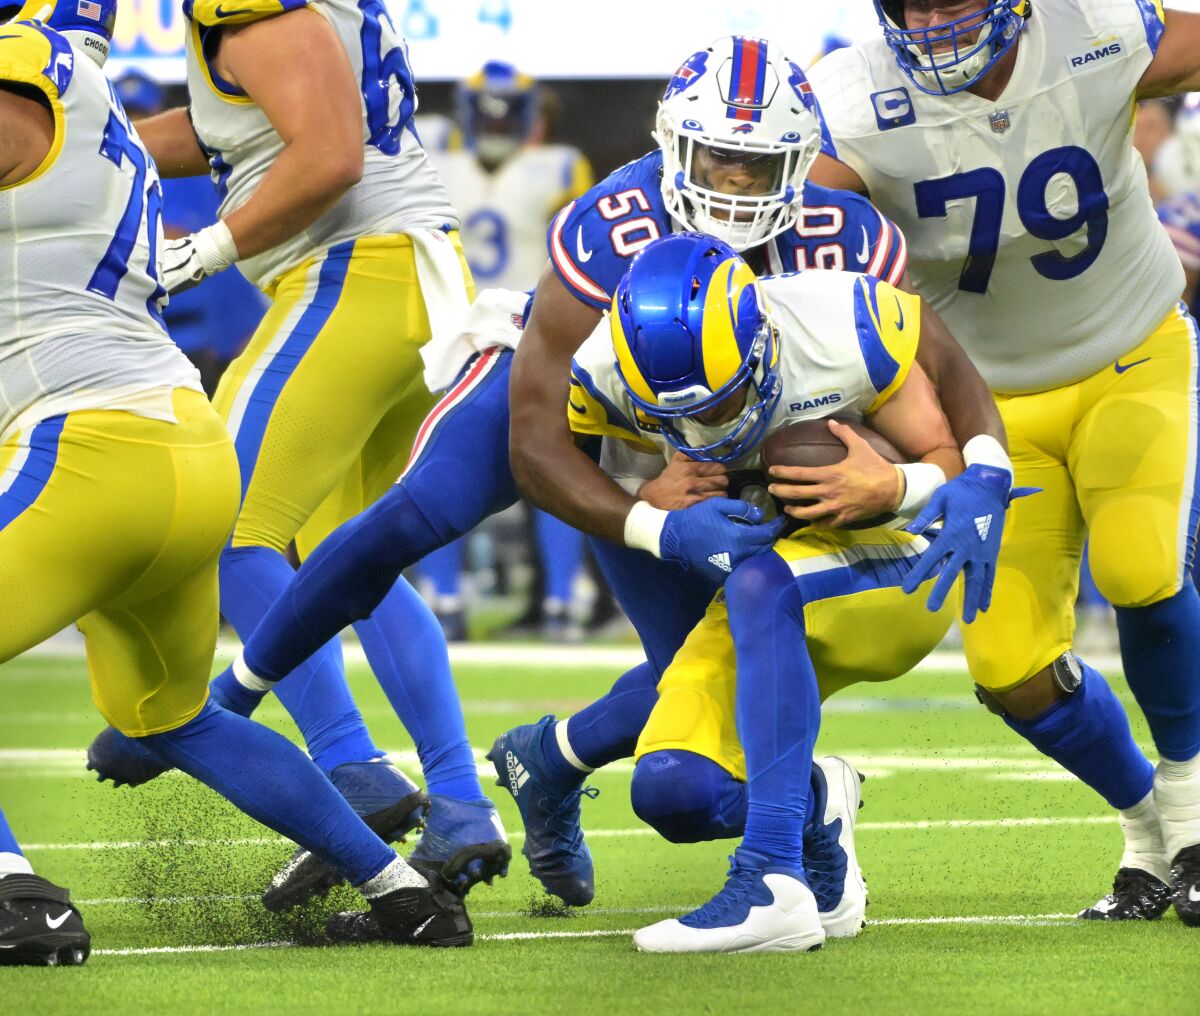 Rams quarterback Matthew Stafford is fired by Bill's defensive end Gregory Rousseau in the third quarter.